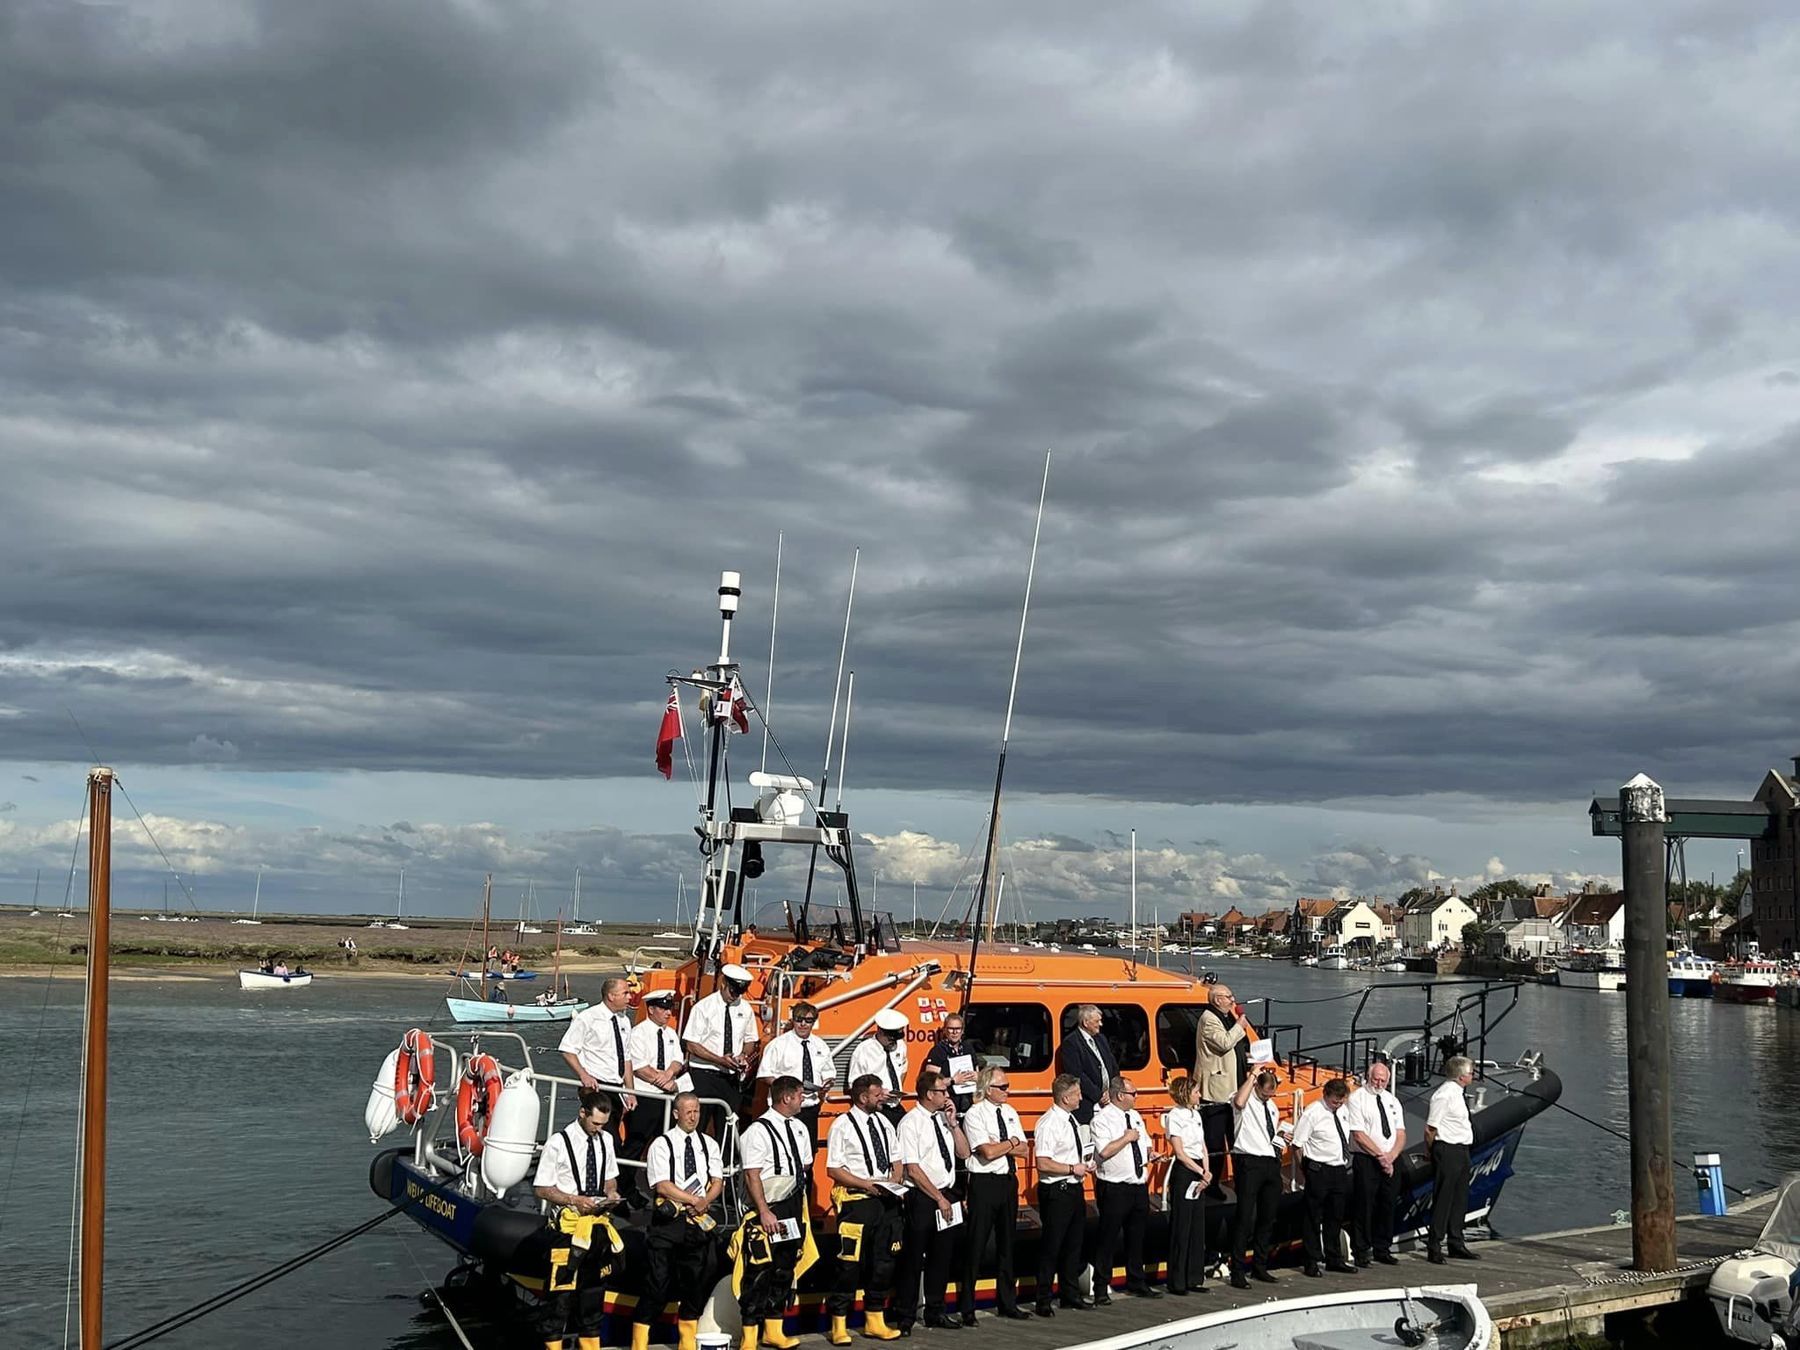 Crew and lifeboat alongside for our annual lifeboat service at the quay